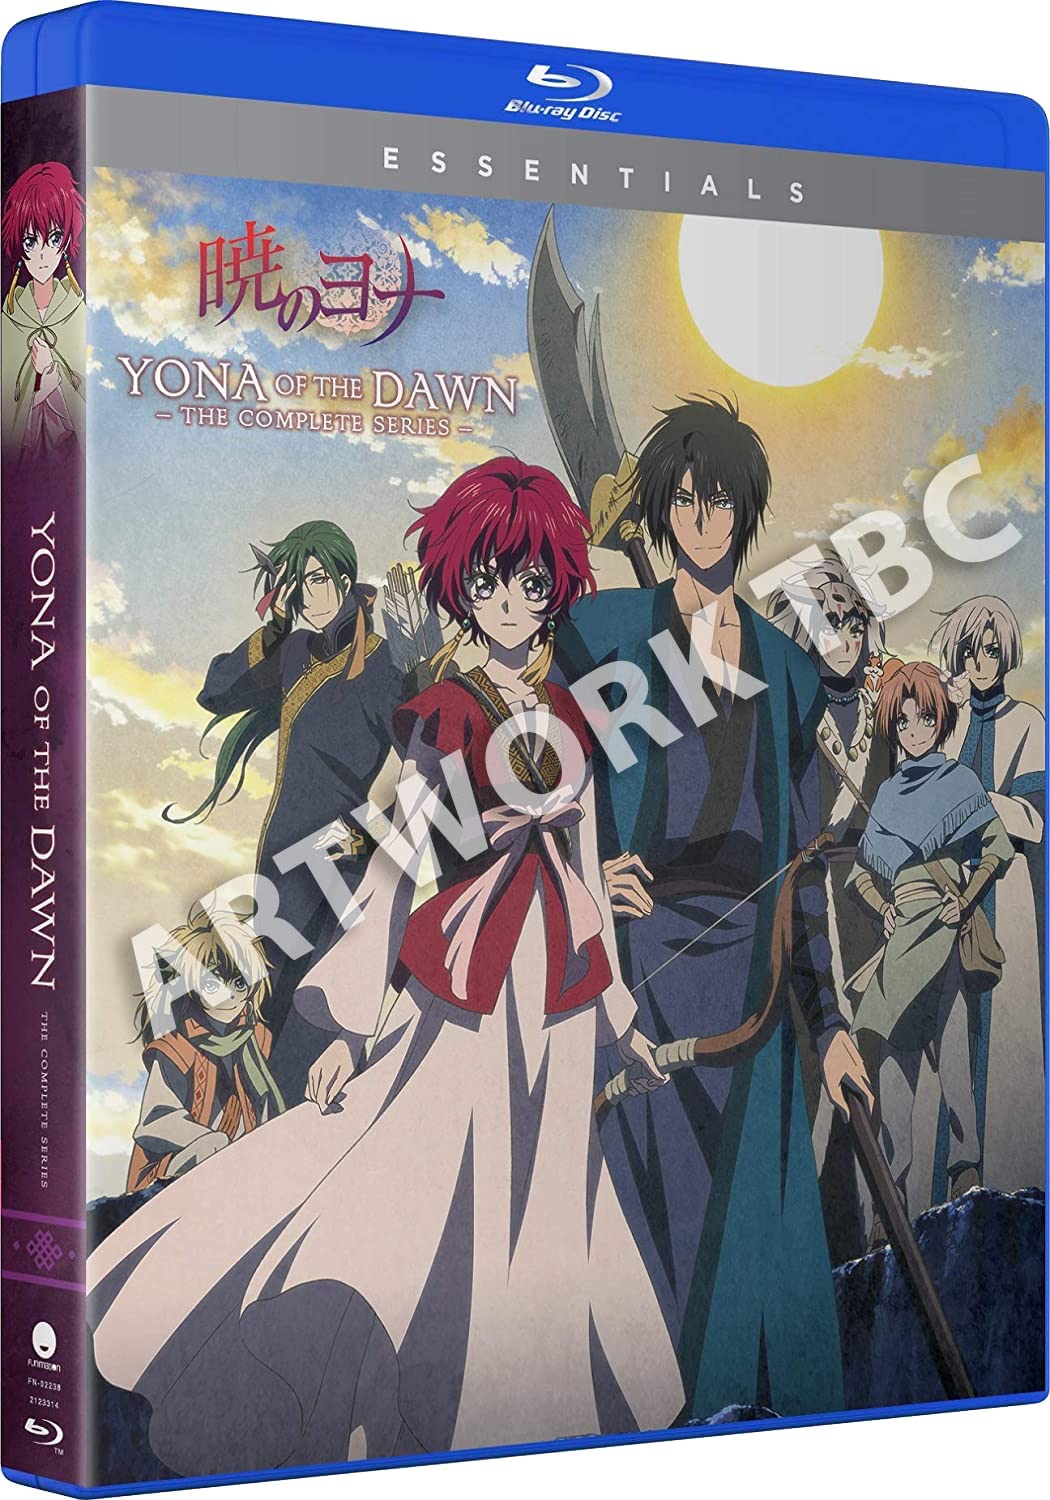 Yona of the Dawn The Complete Series - Limited Edition [Blu-ray]